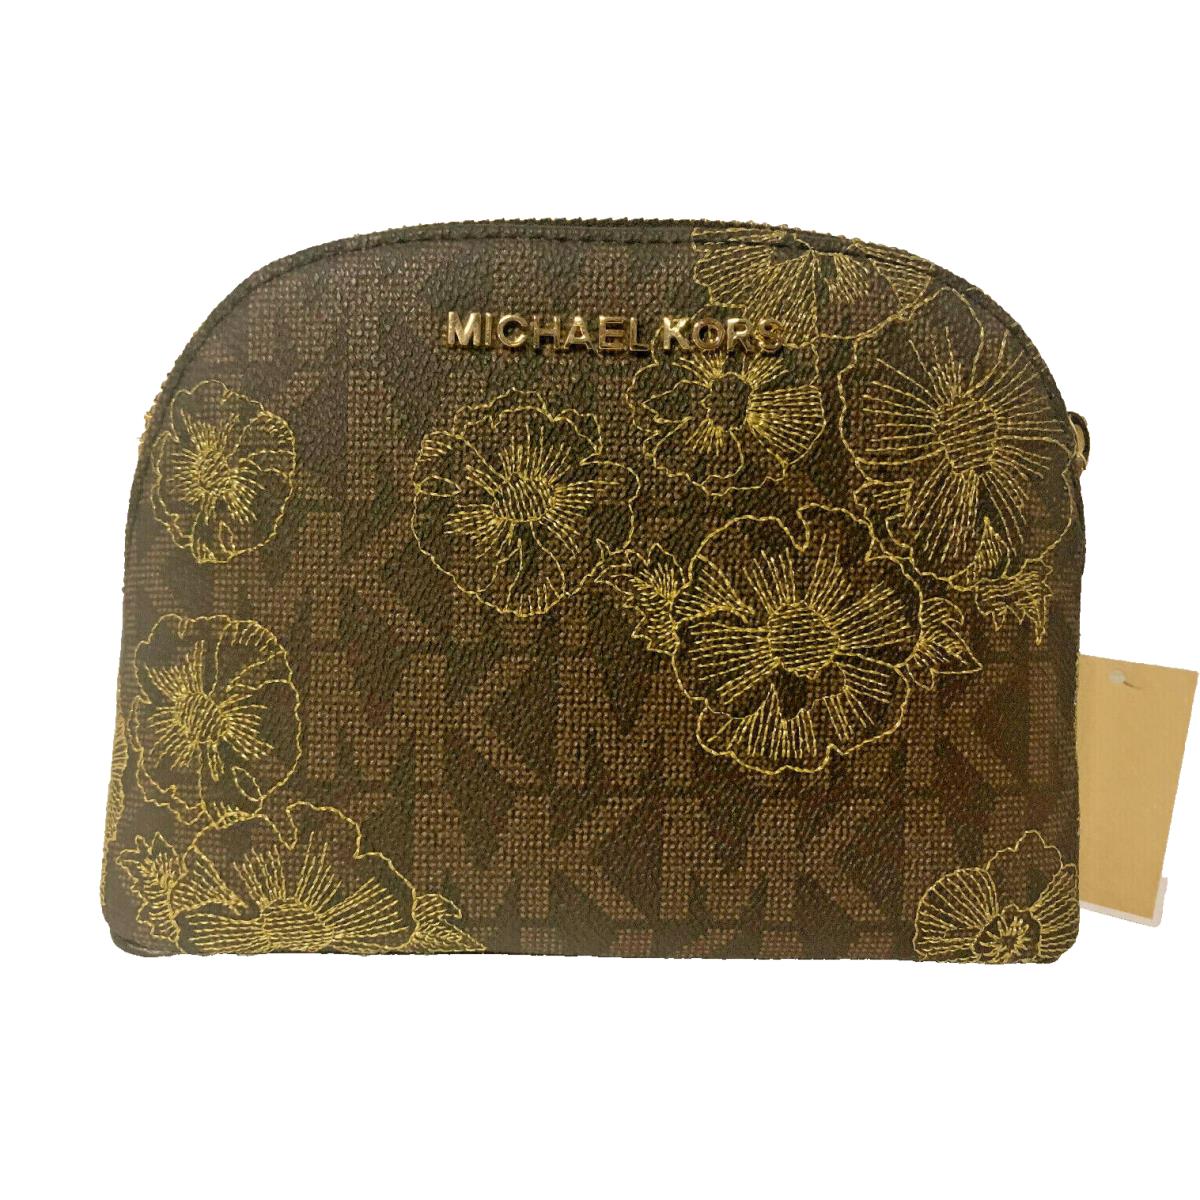 Michael Kors MK Jet Set Travel Cosmetic Large Pouch-brown